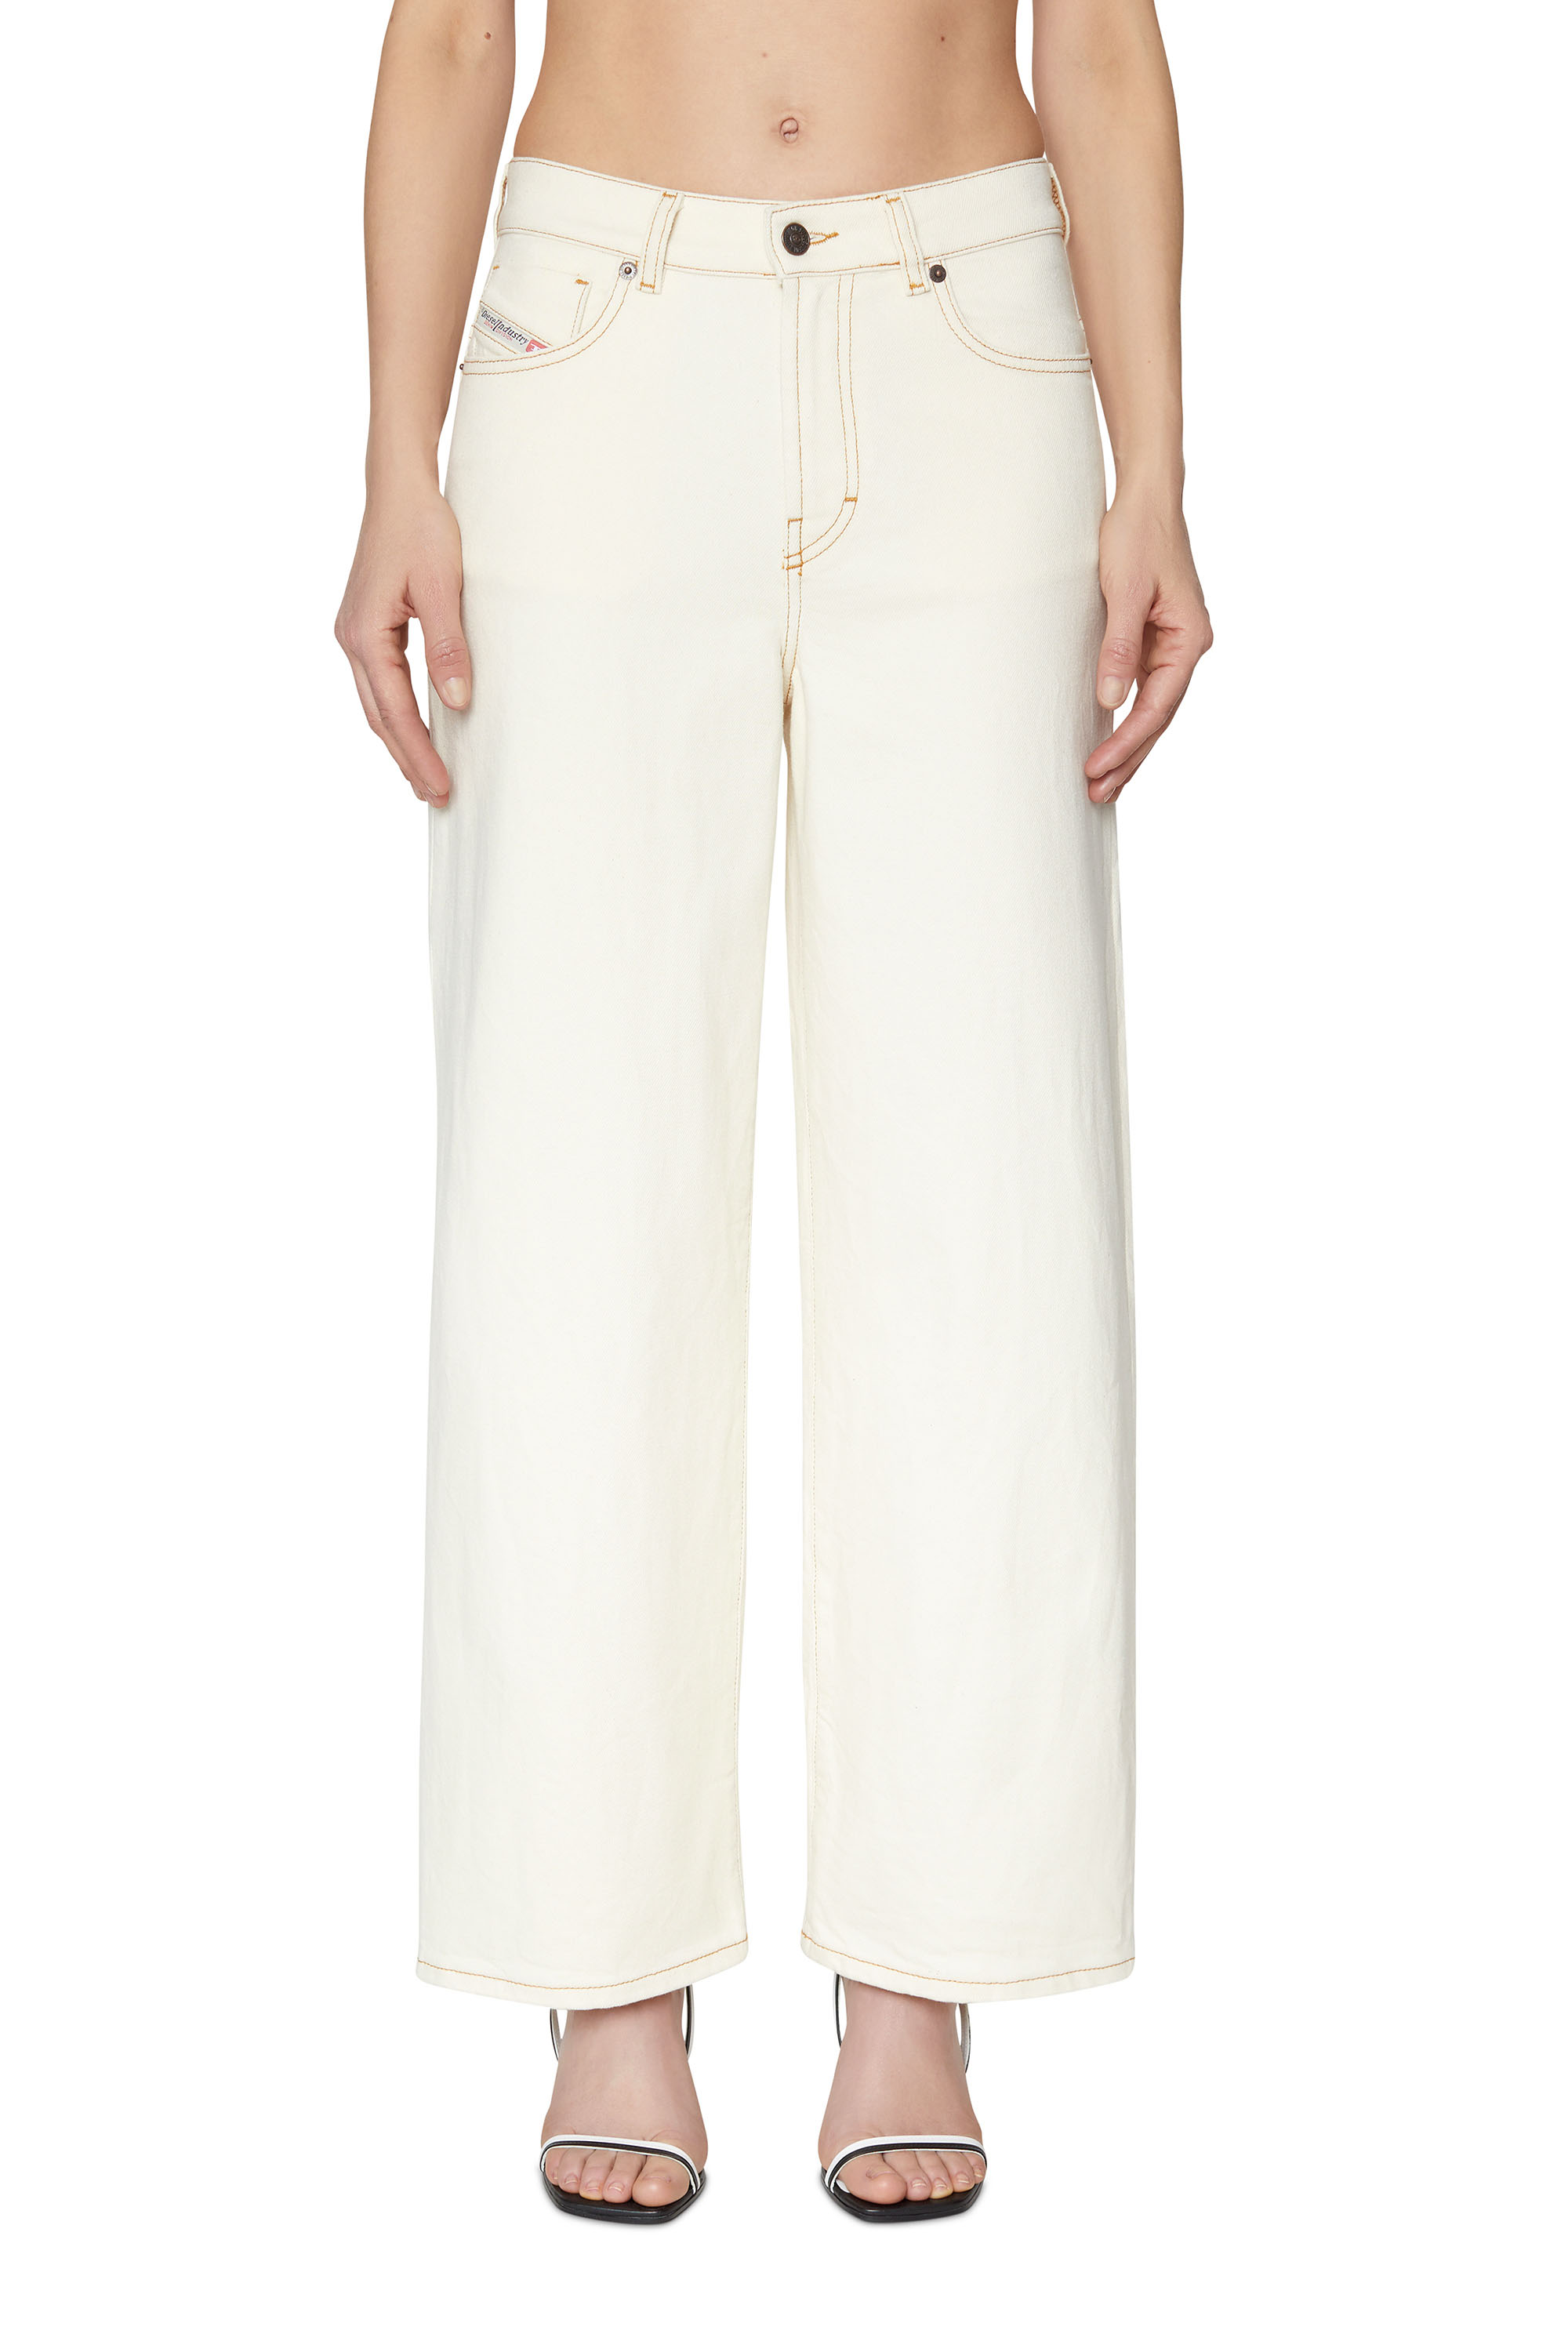 Diesel - 2000 09B94 Bootcut and Flare Jeans, White - Image 2